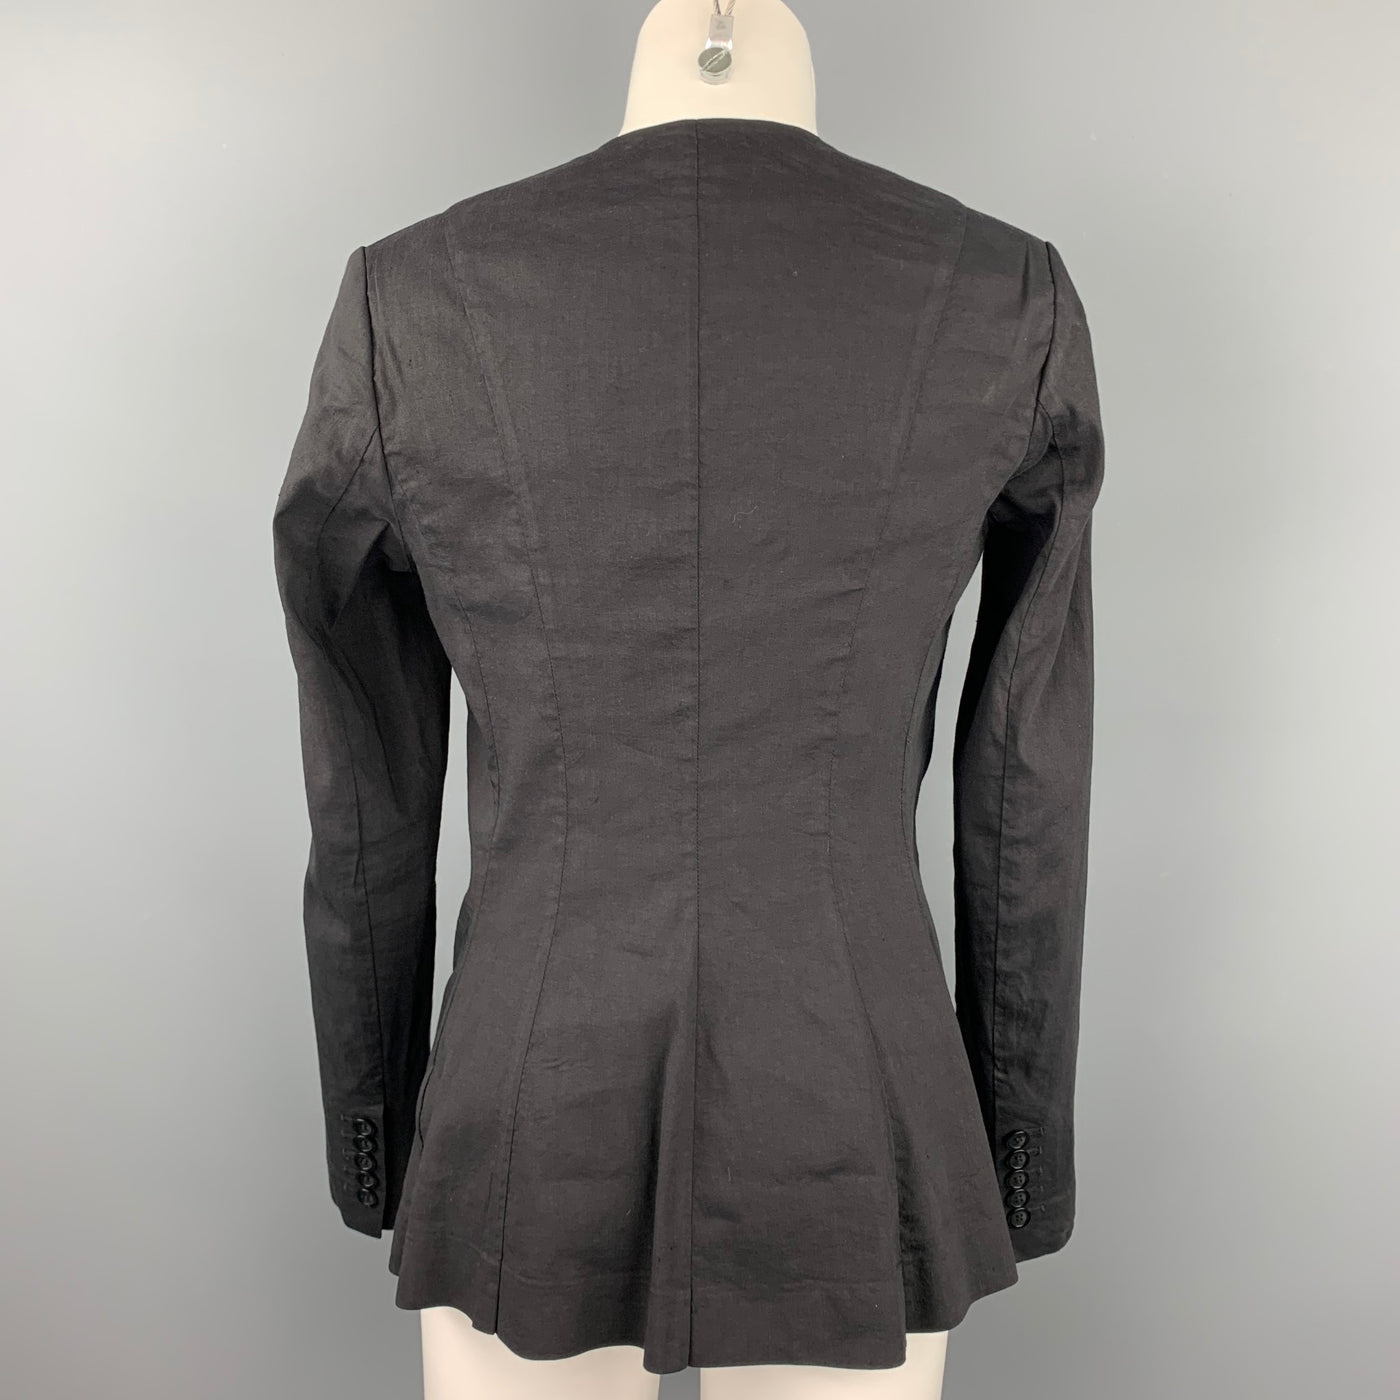 THEORY Size 4 Black Linen Blend Collarless Open Front Jacket